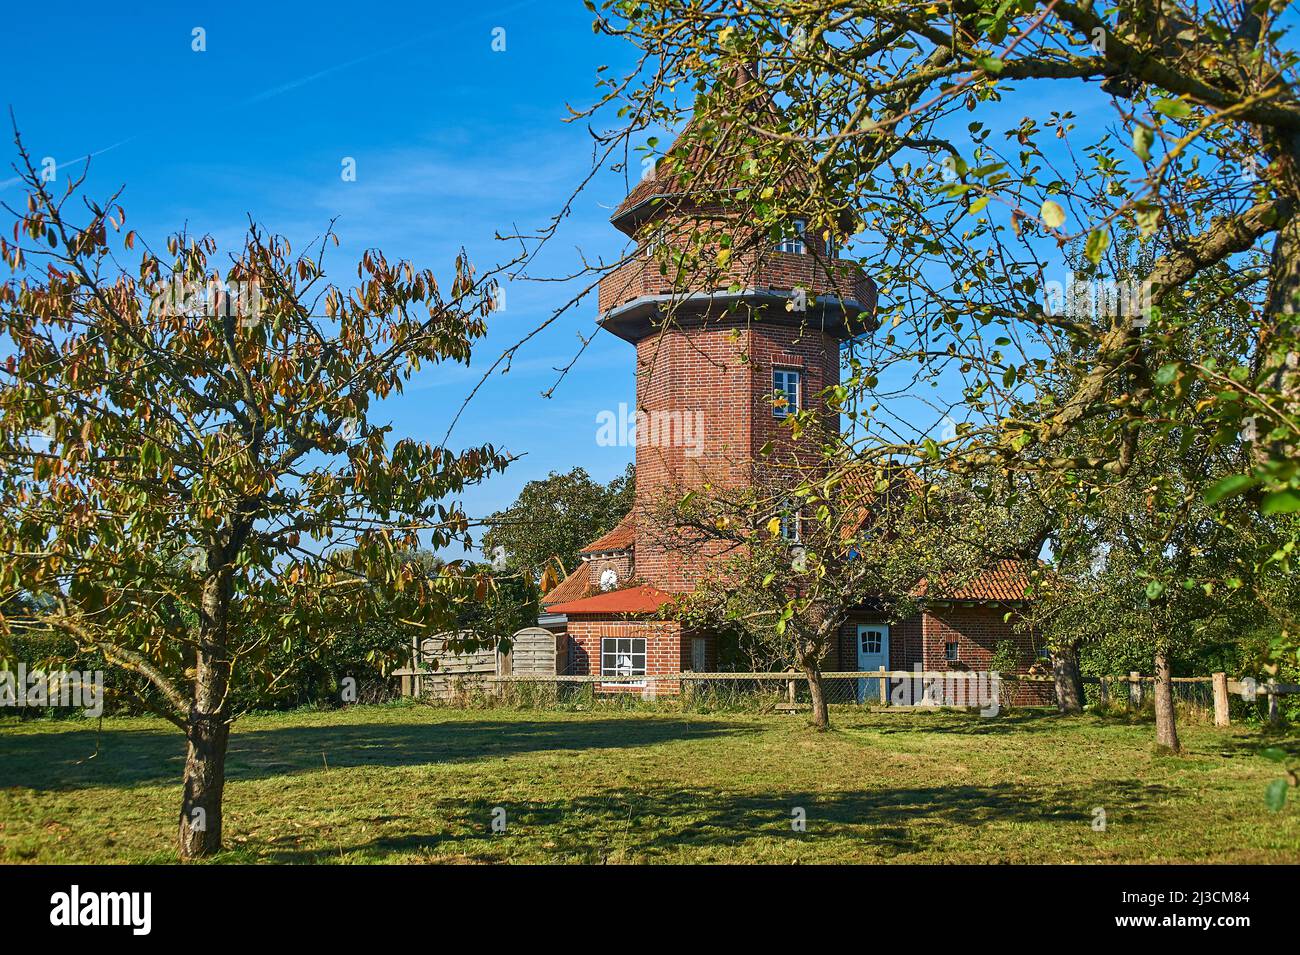 Lighthouse keeper building in Dahmeshöved, Northern Germany, Europe Stock Photo